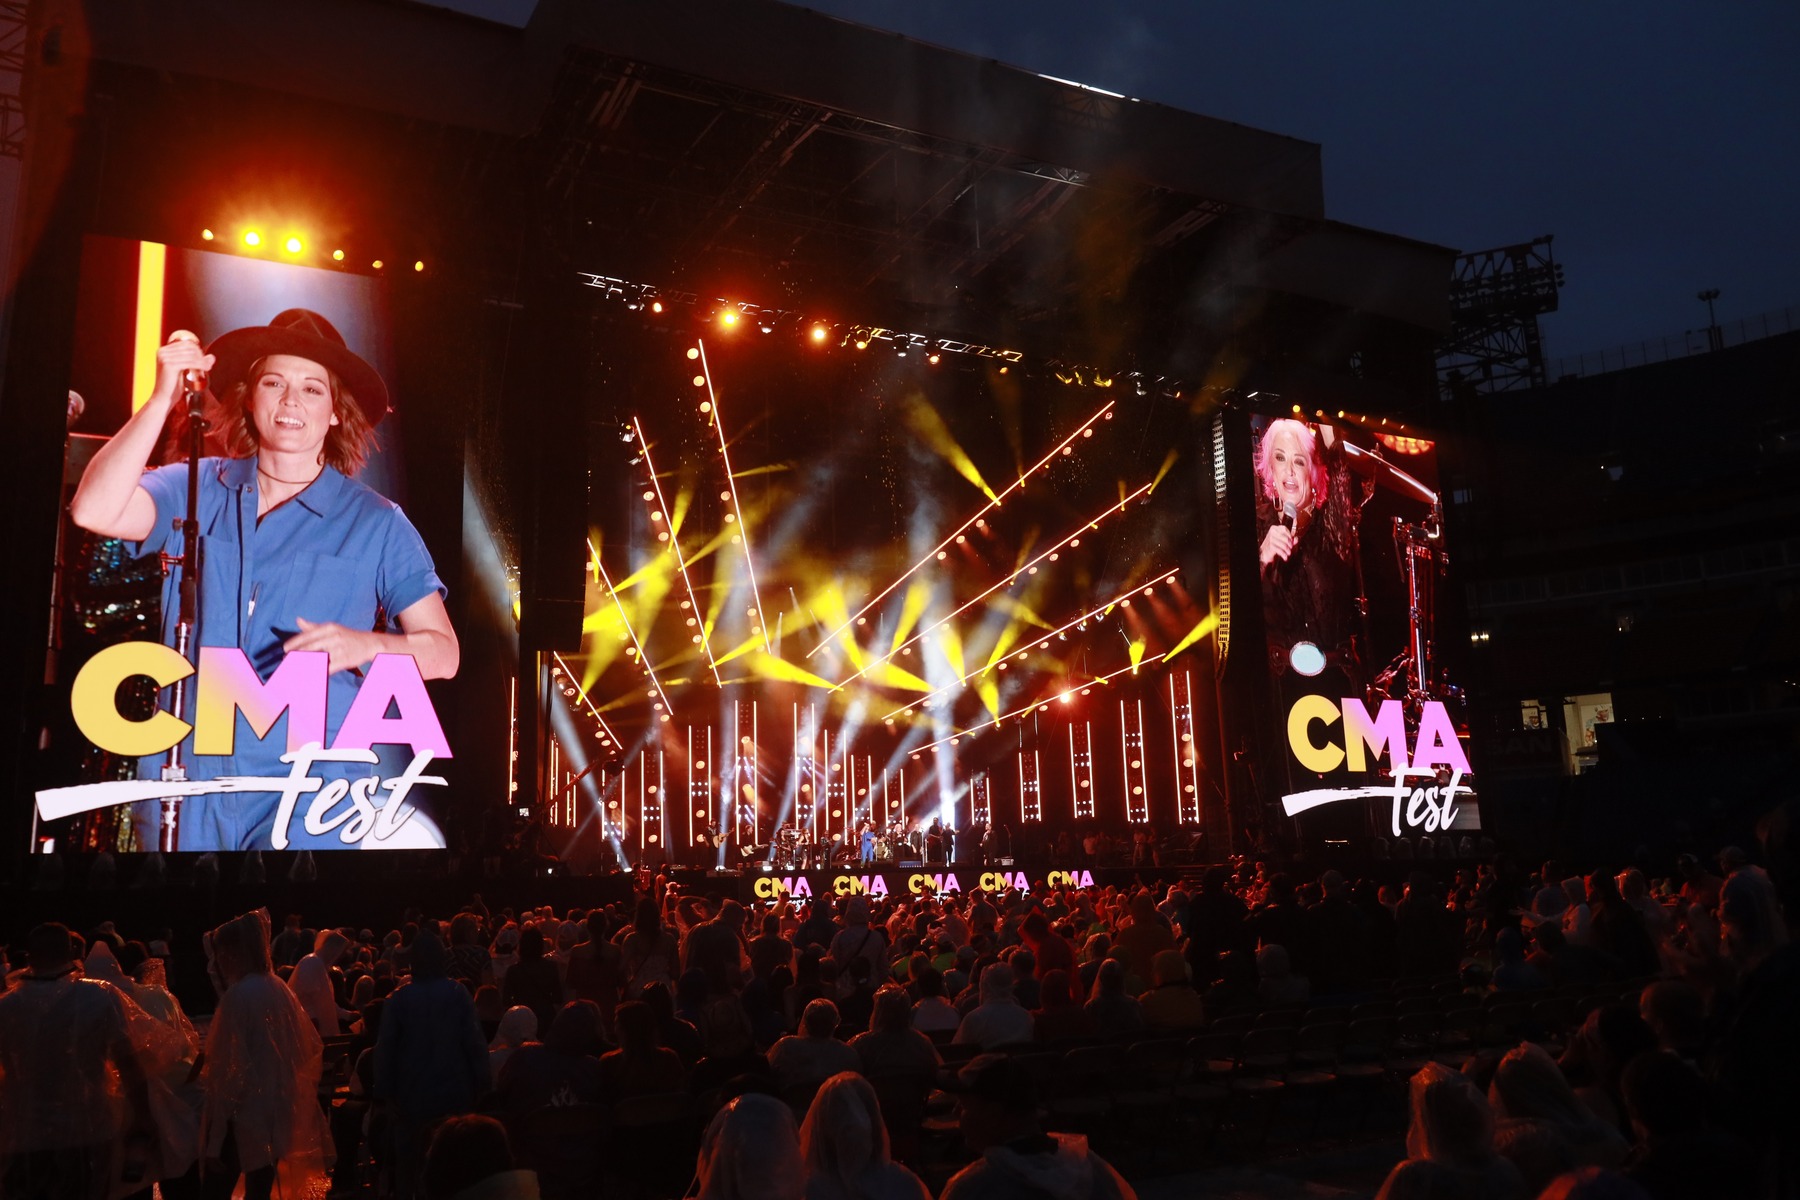 11 Facts About CMA Music Festival